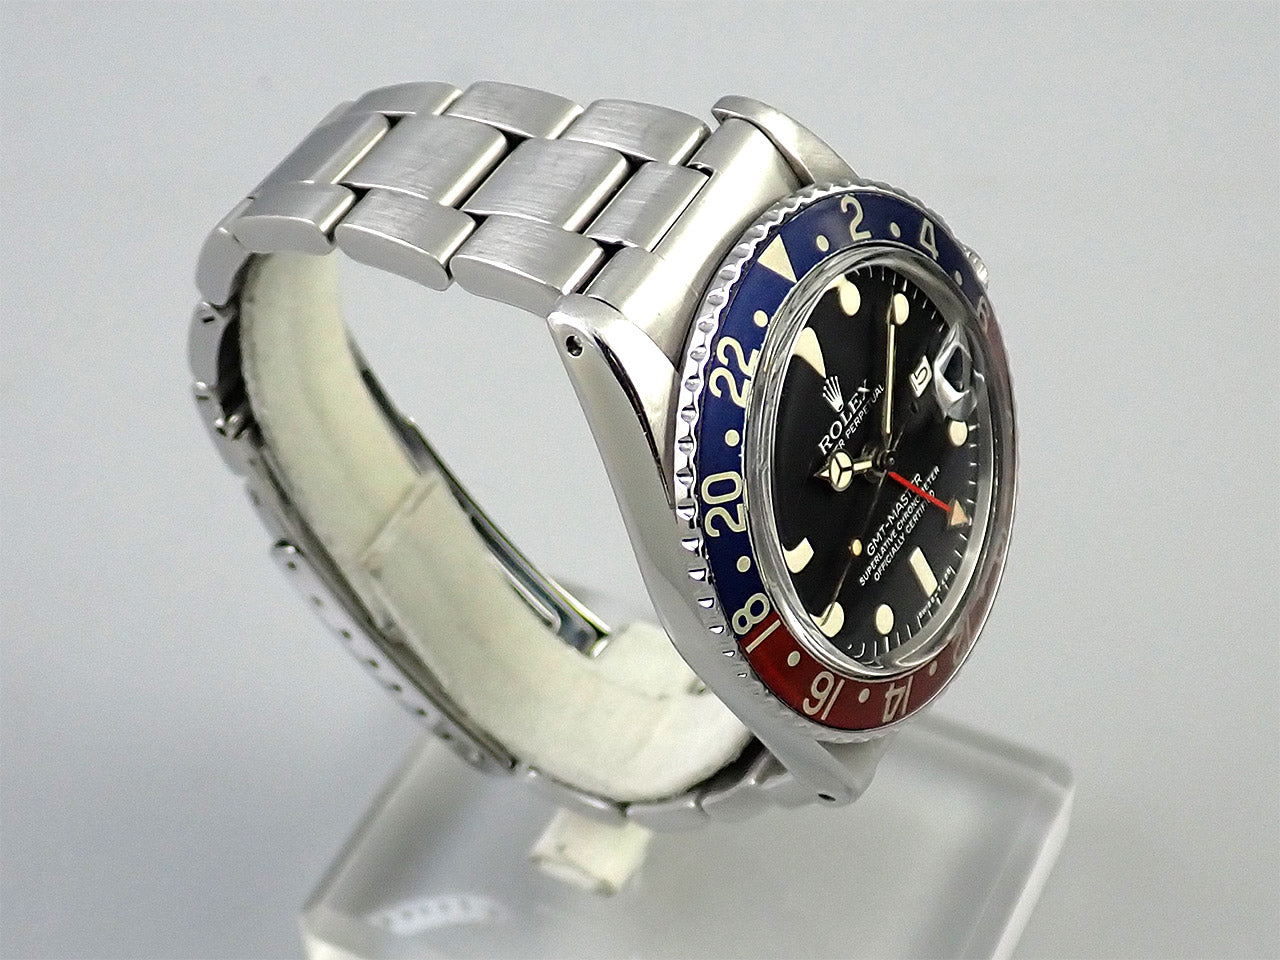 Rolex GMT Master &lt;Box and Others&gt;